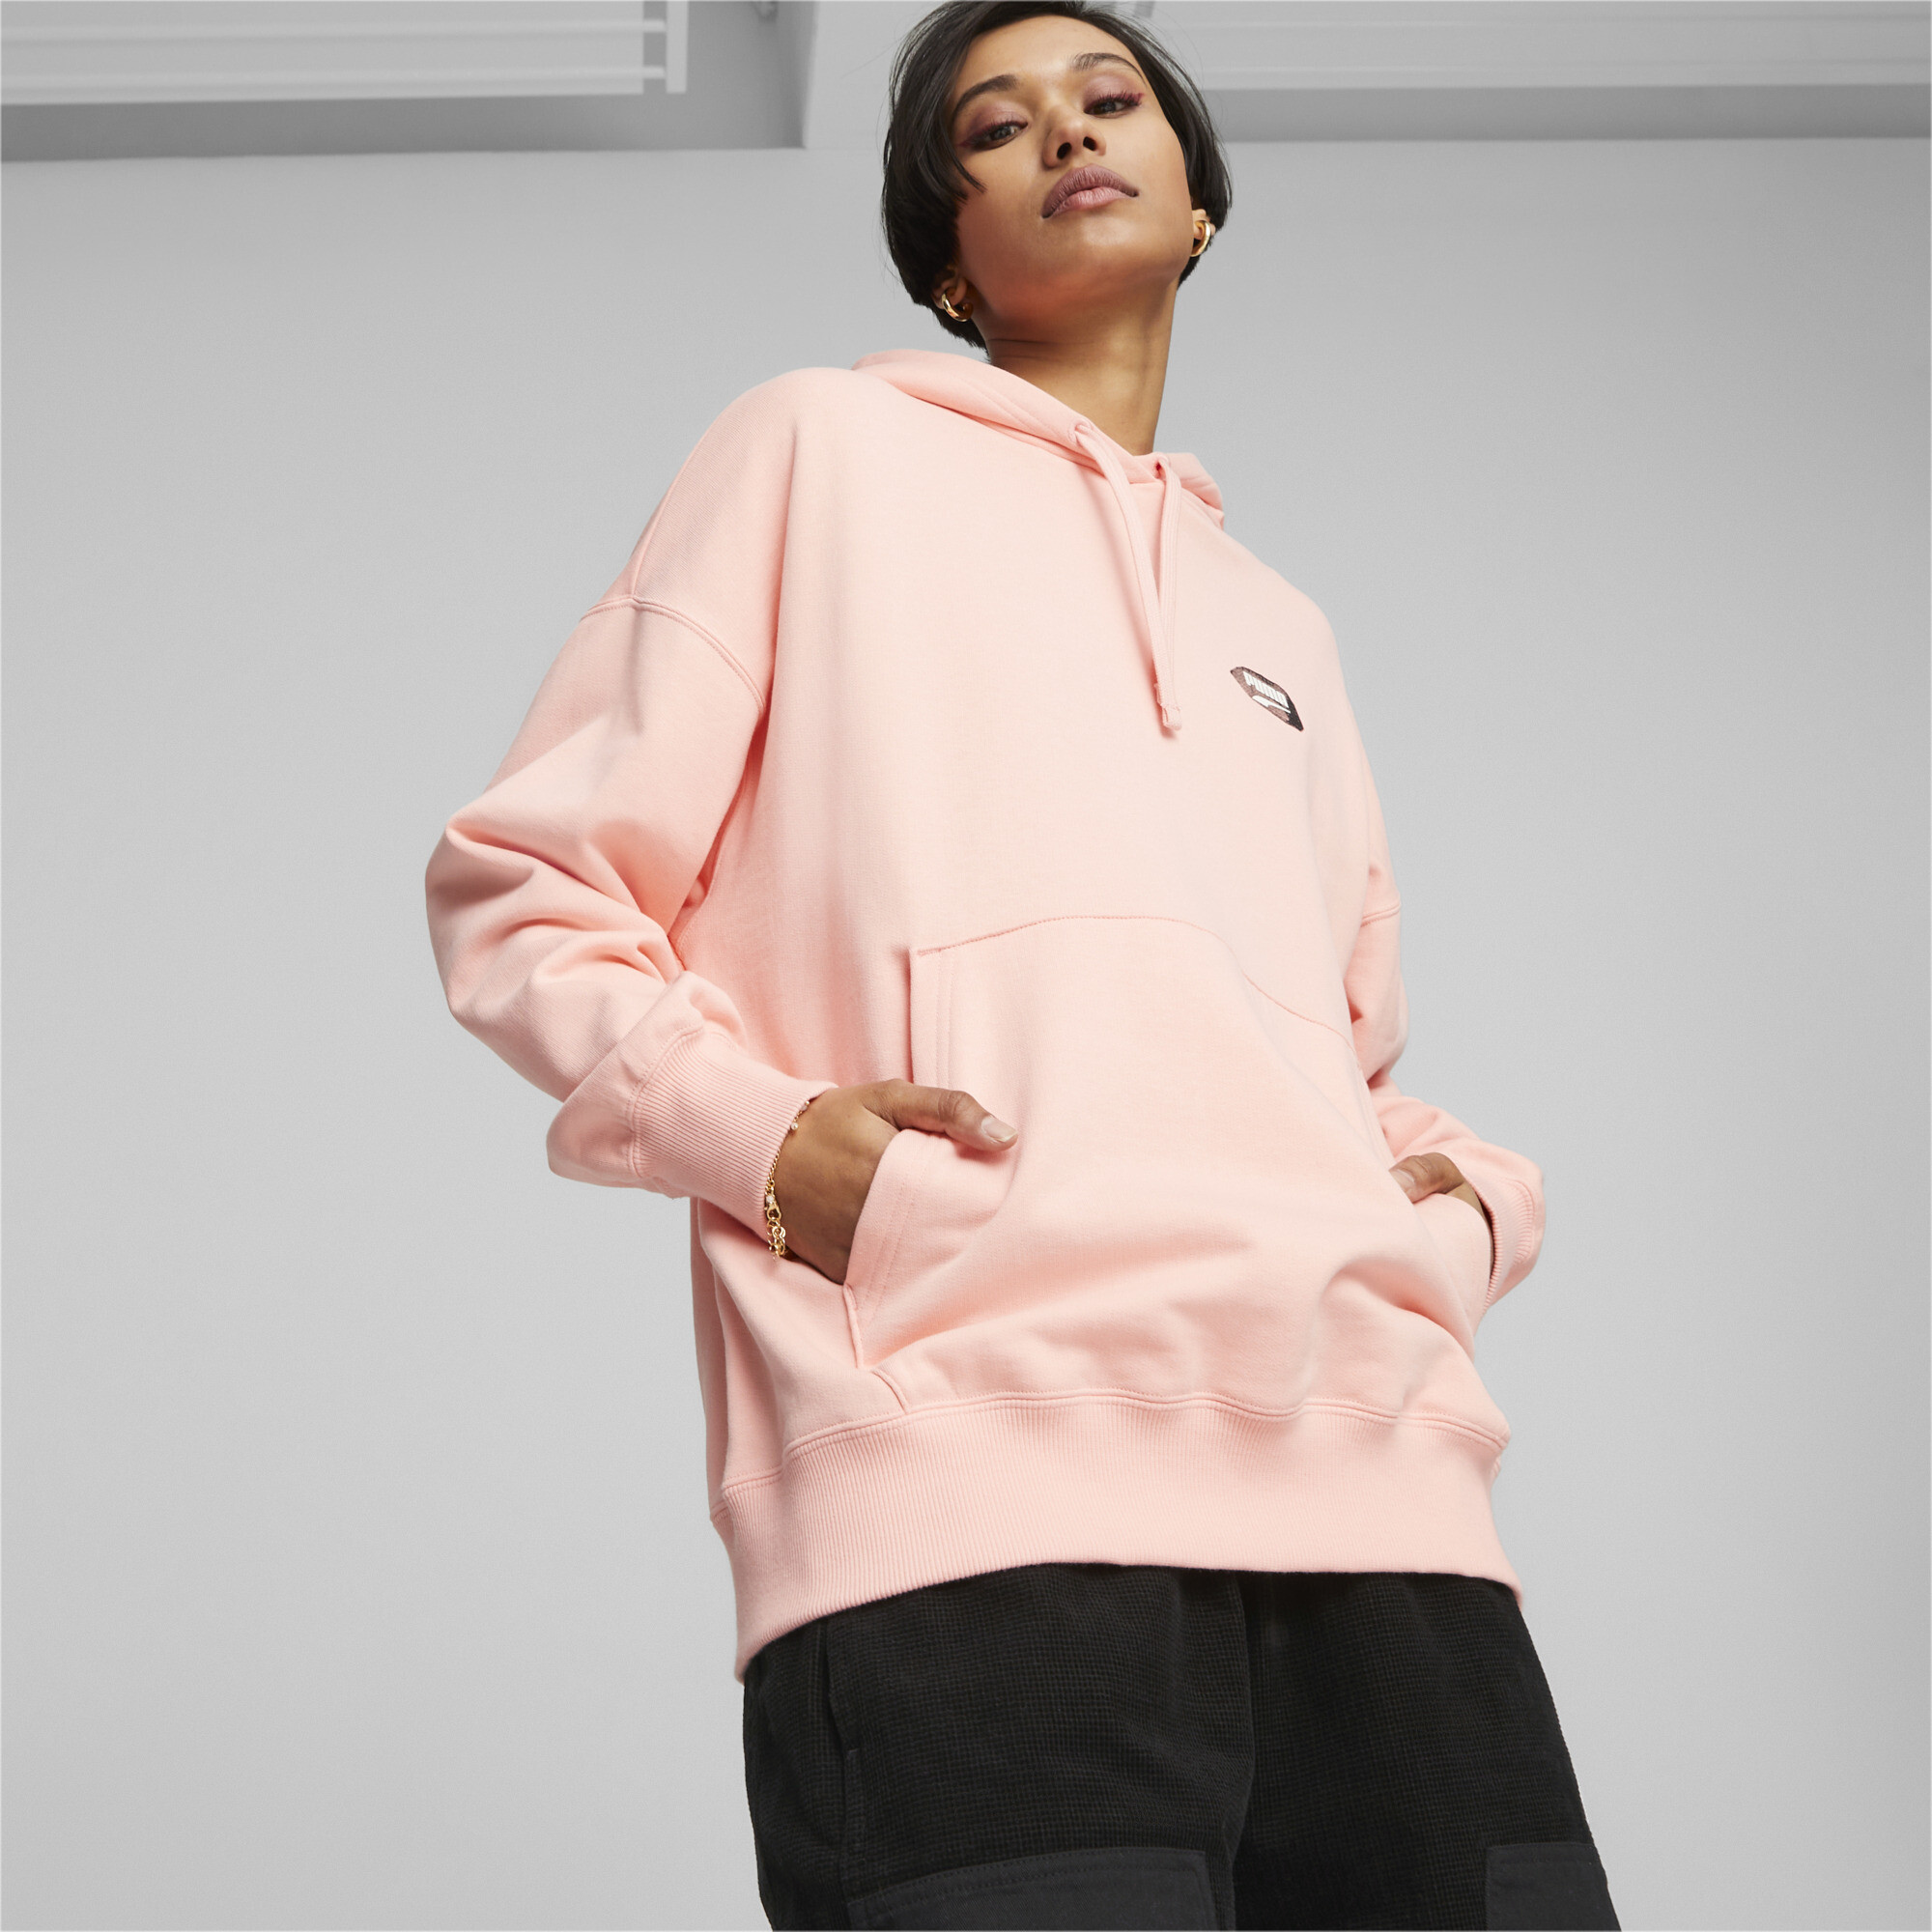 Women's Puma DOWNTOWN's Oversized Graphic Hoodie, Pink, Size XL, Clothing